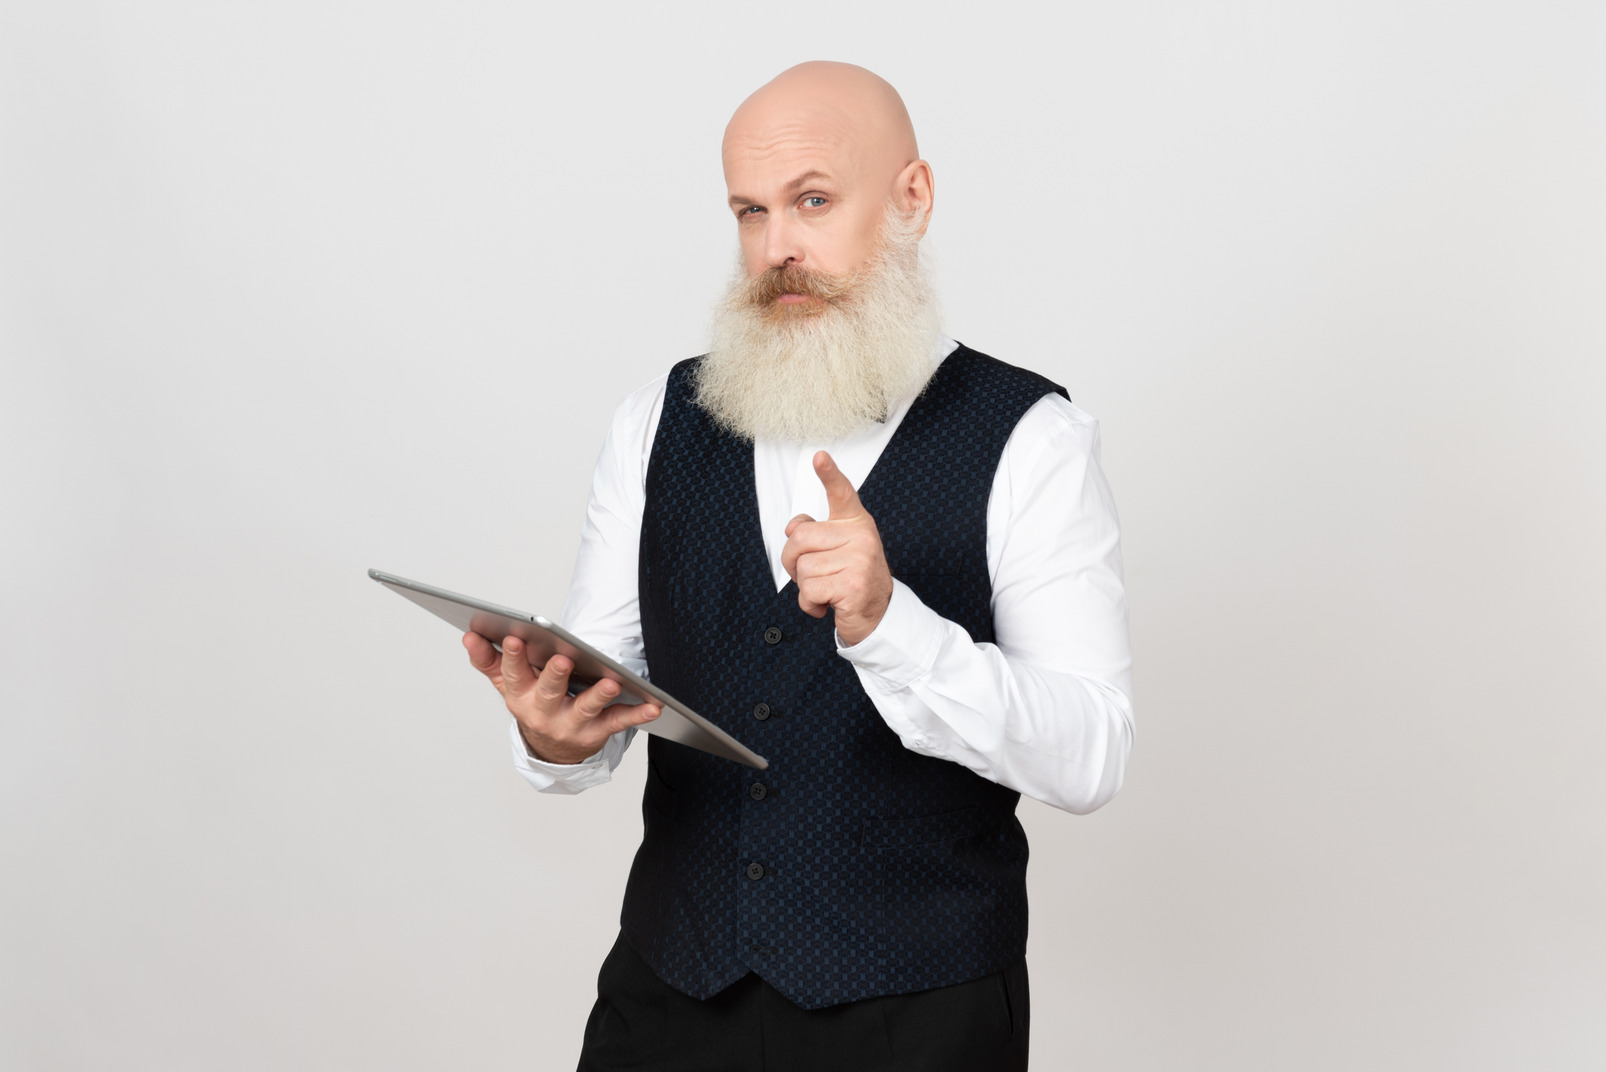 Aged man holding tablet and pointing something out